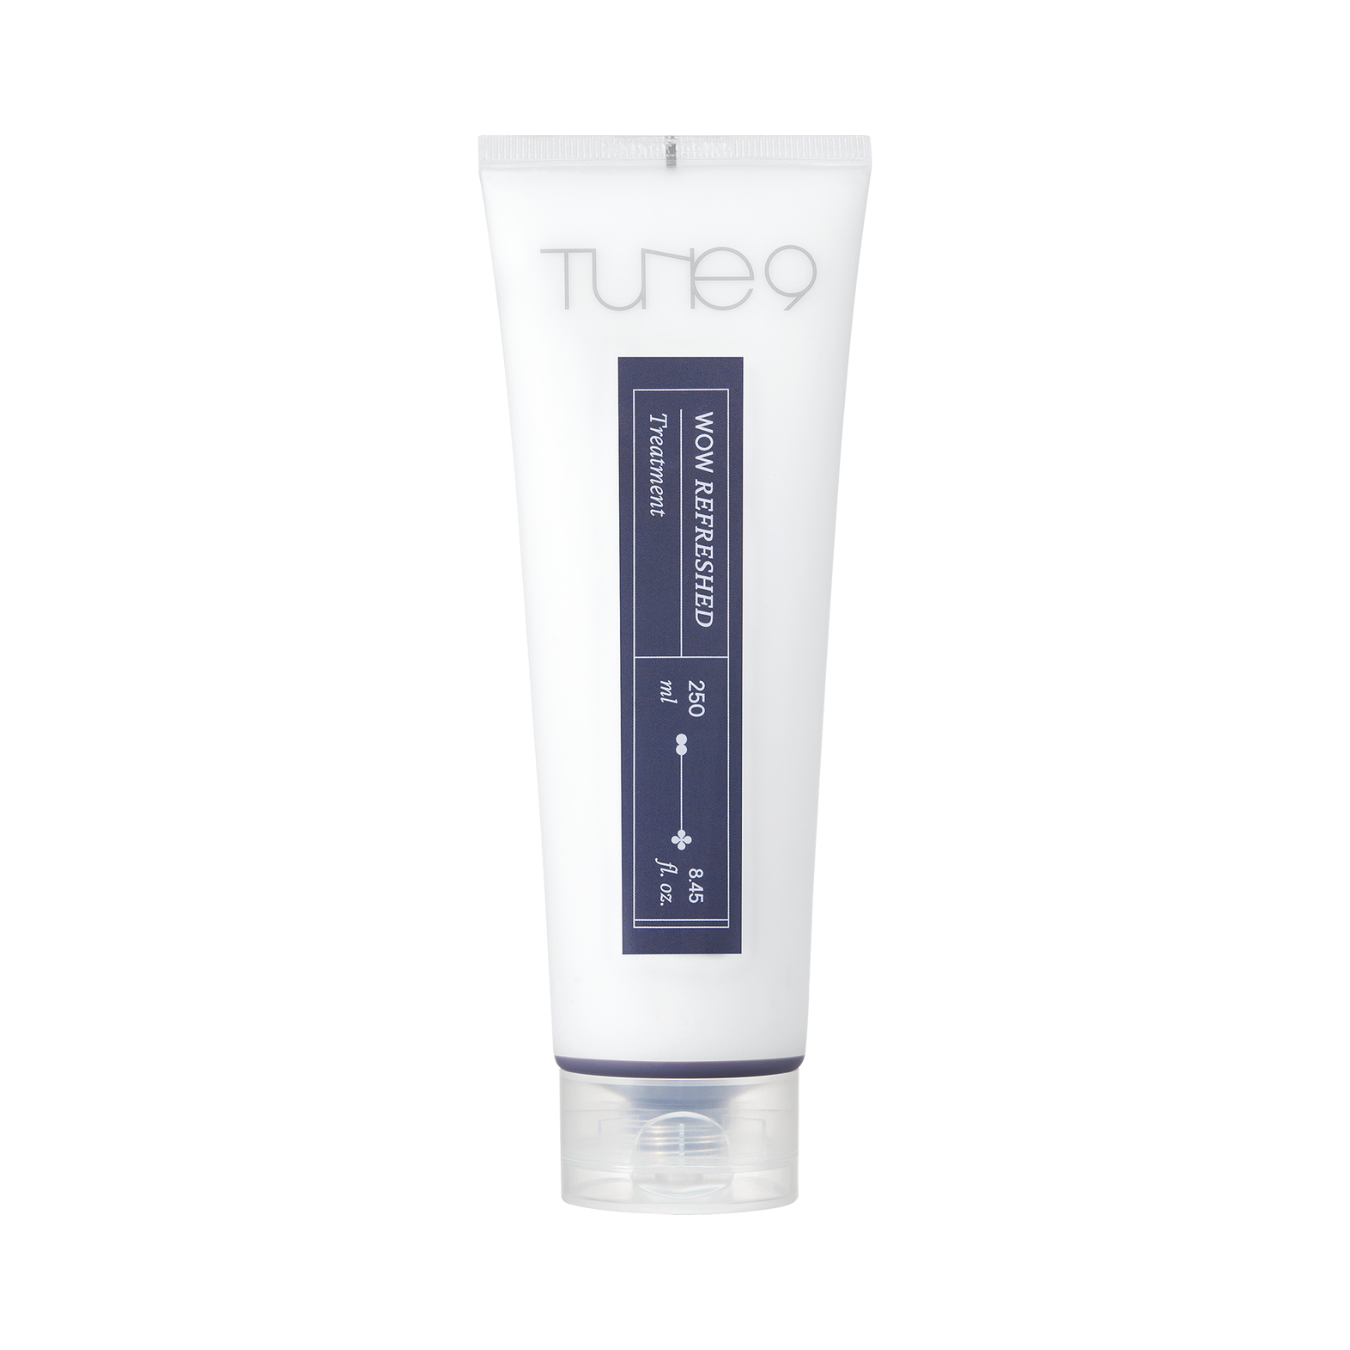 Tune9 Wow Refreshed Treatment 250ml